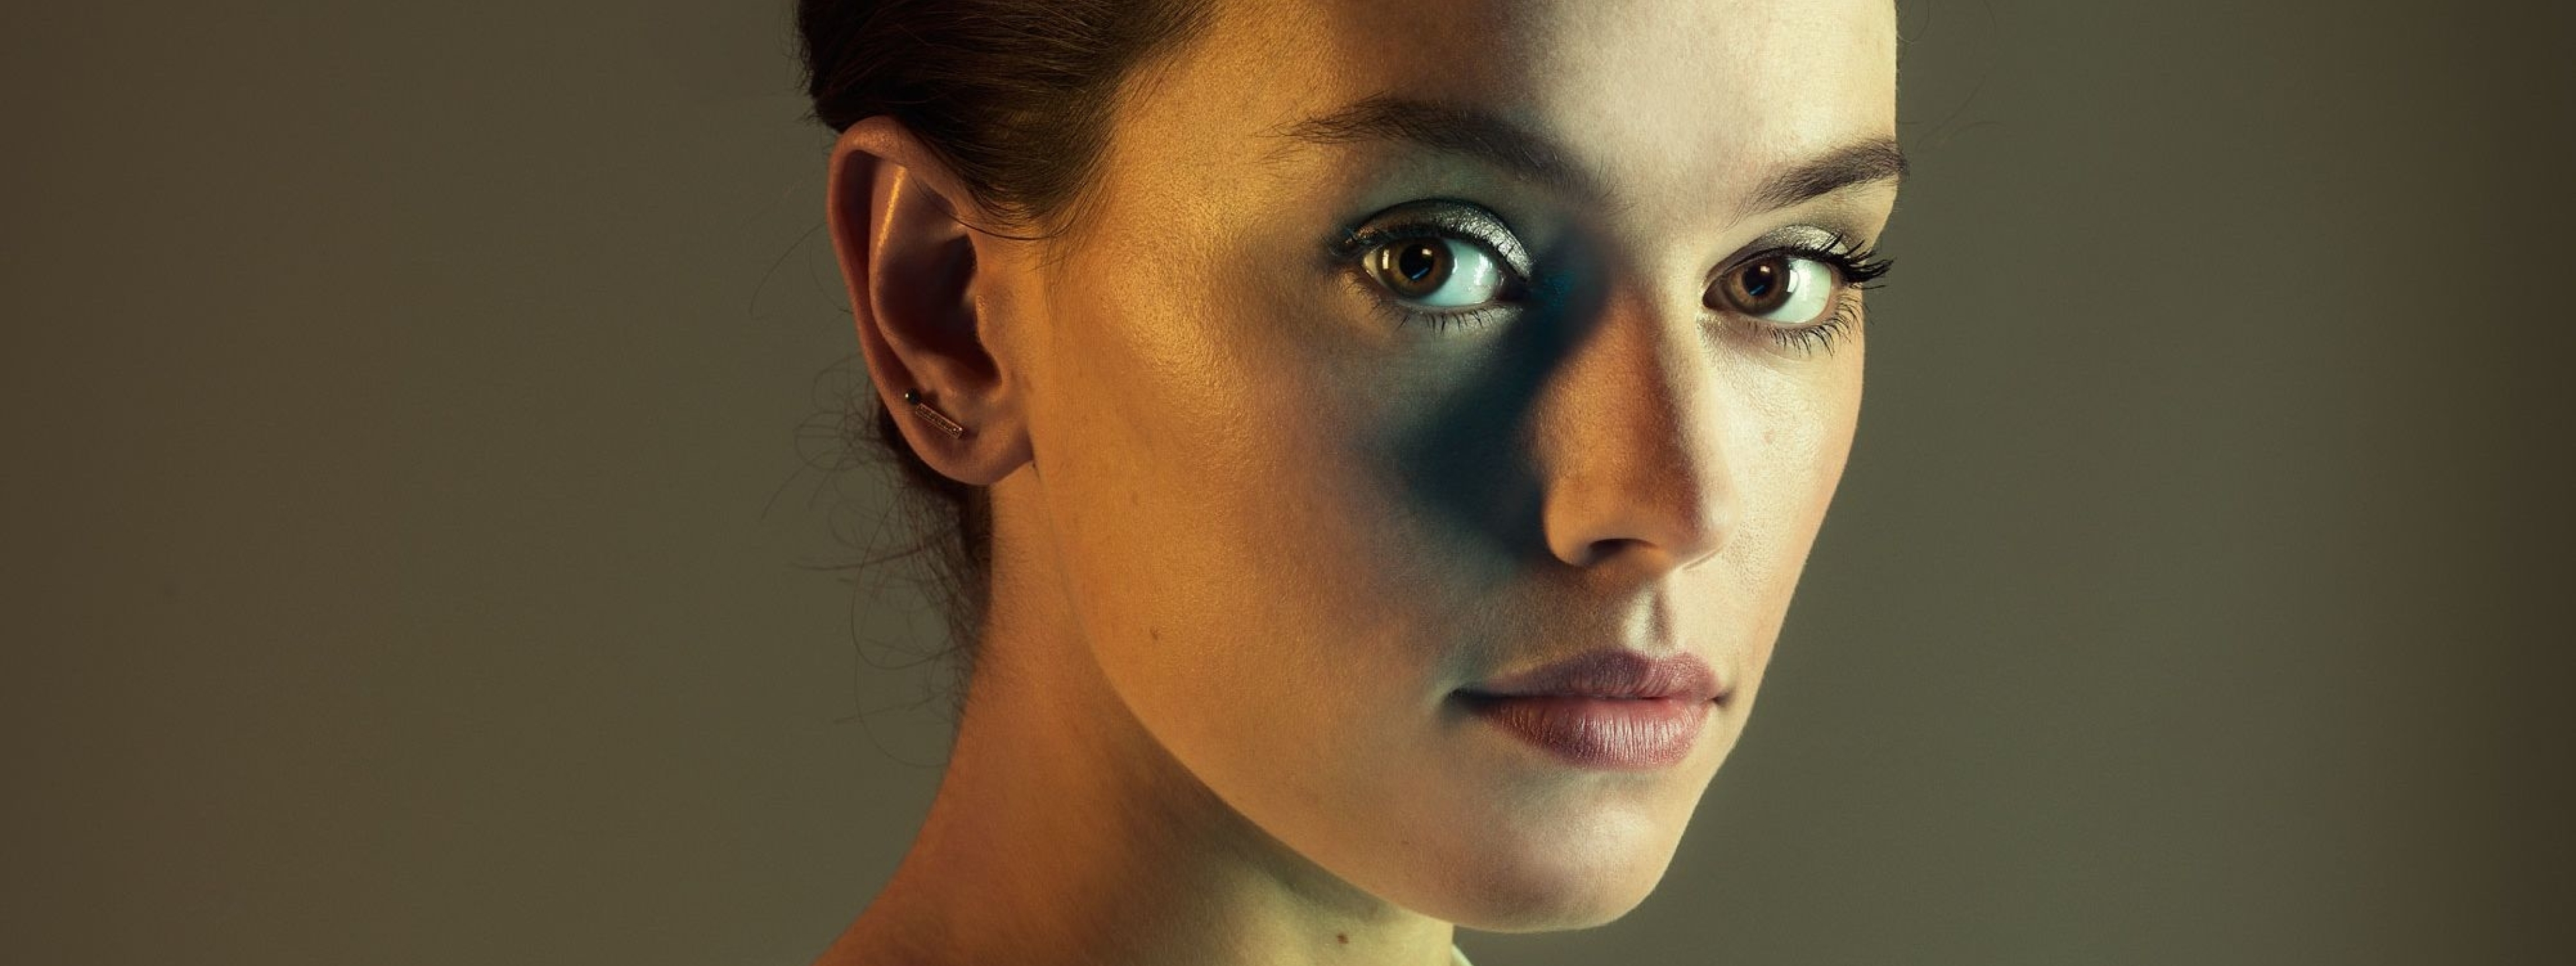 3840x1440 Resolution Daisy Ridley Brown Eyes And Face 3840x1440 ...